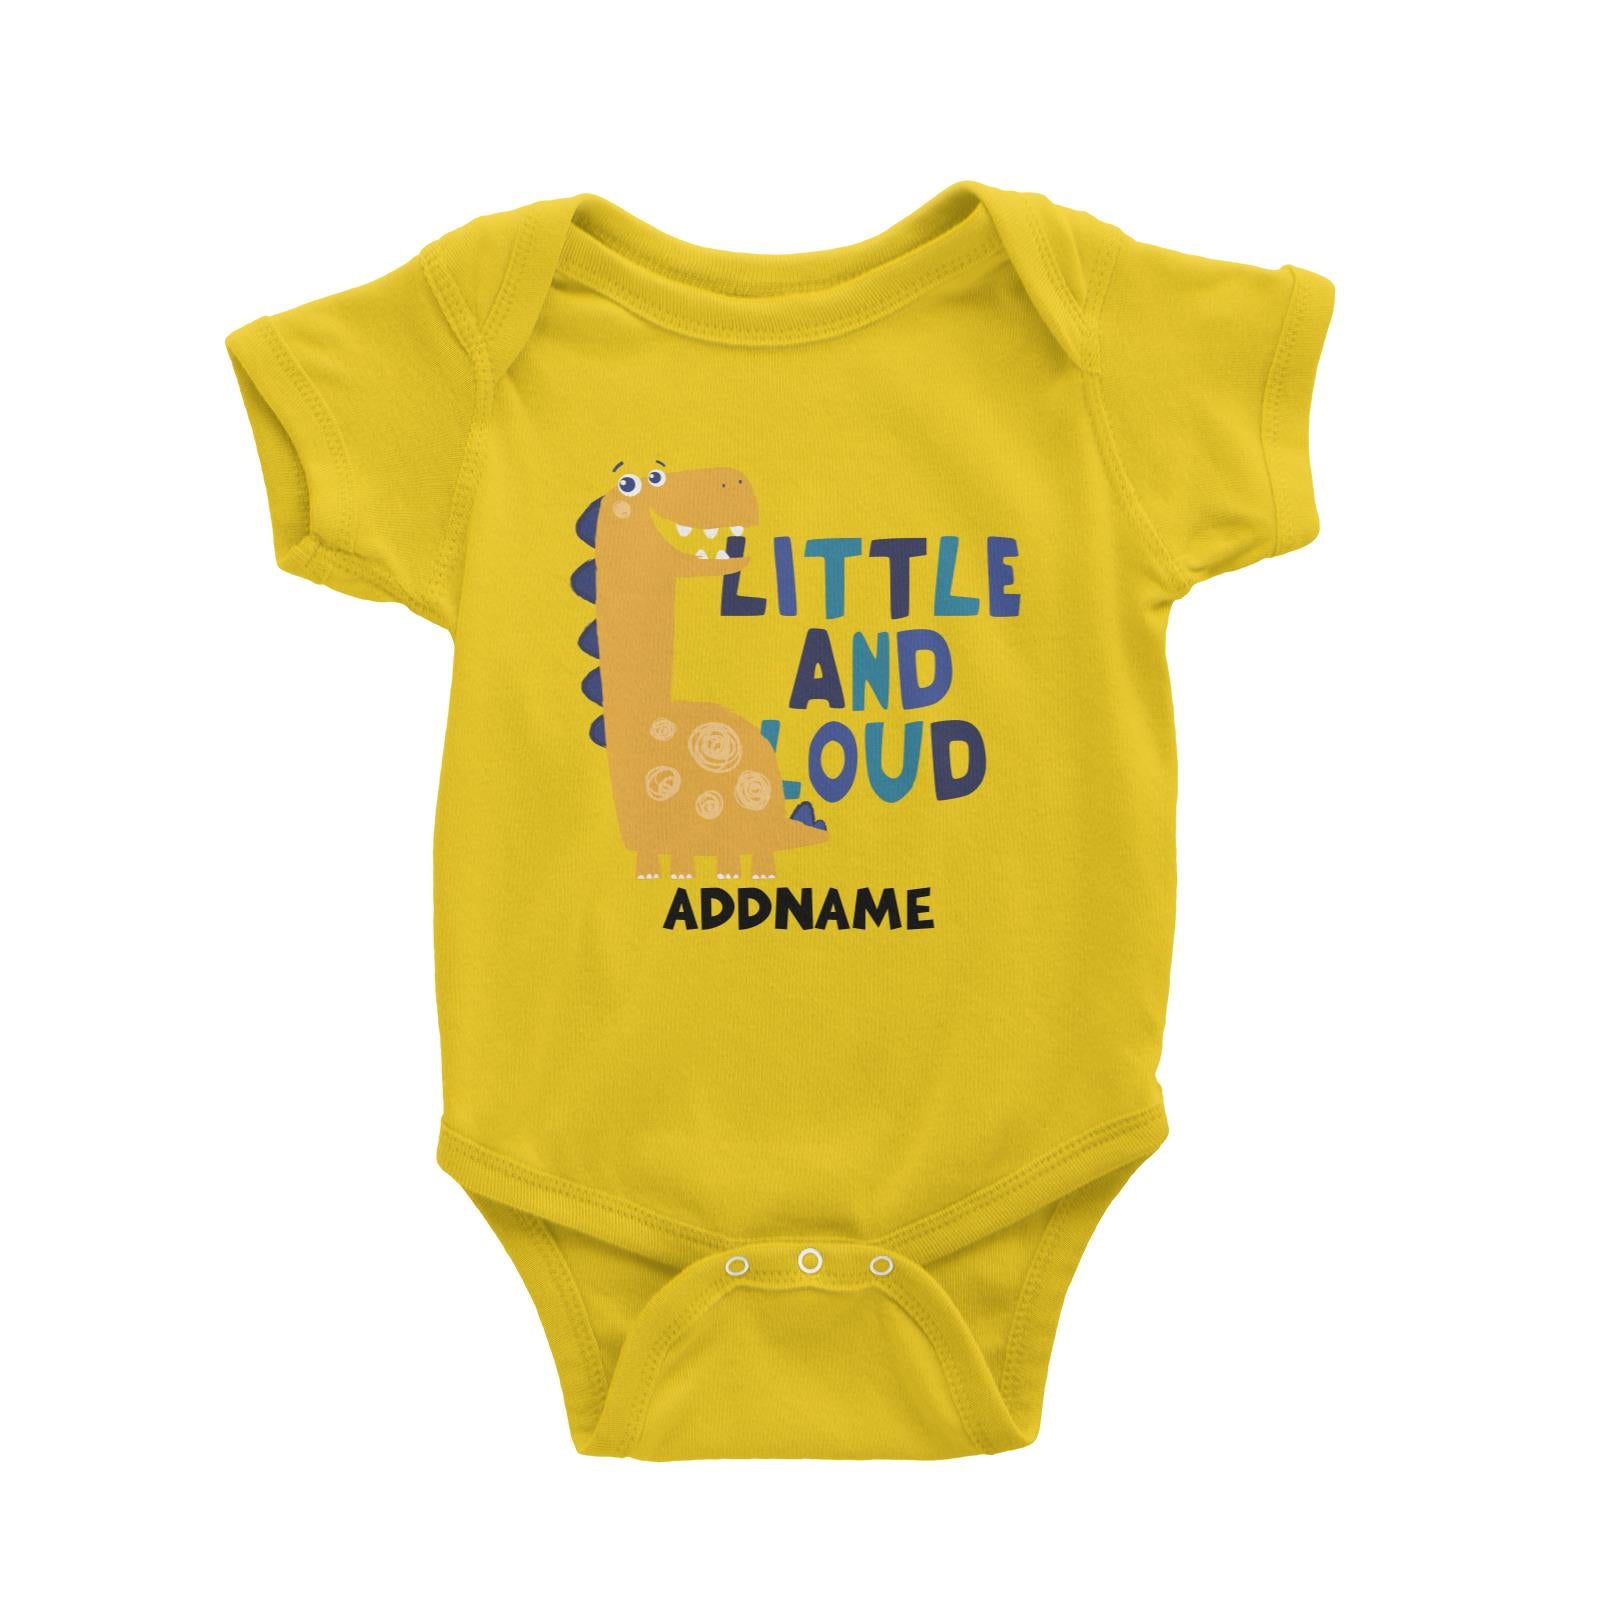 Little and Loud Dinosaur Addname Baby Romper